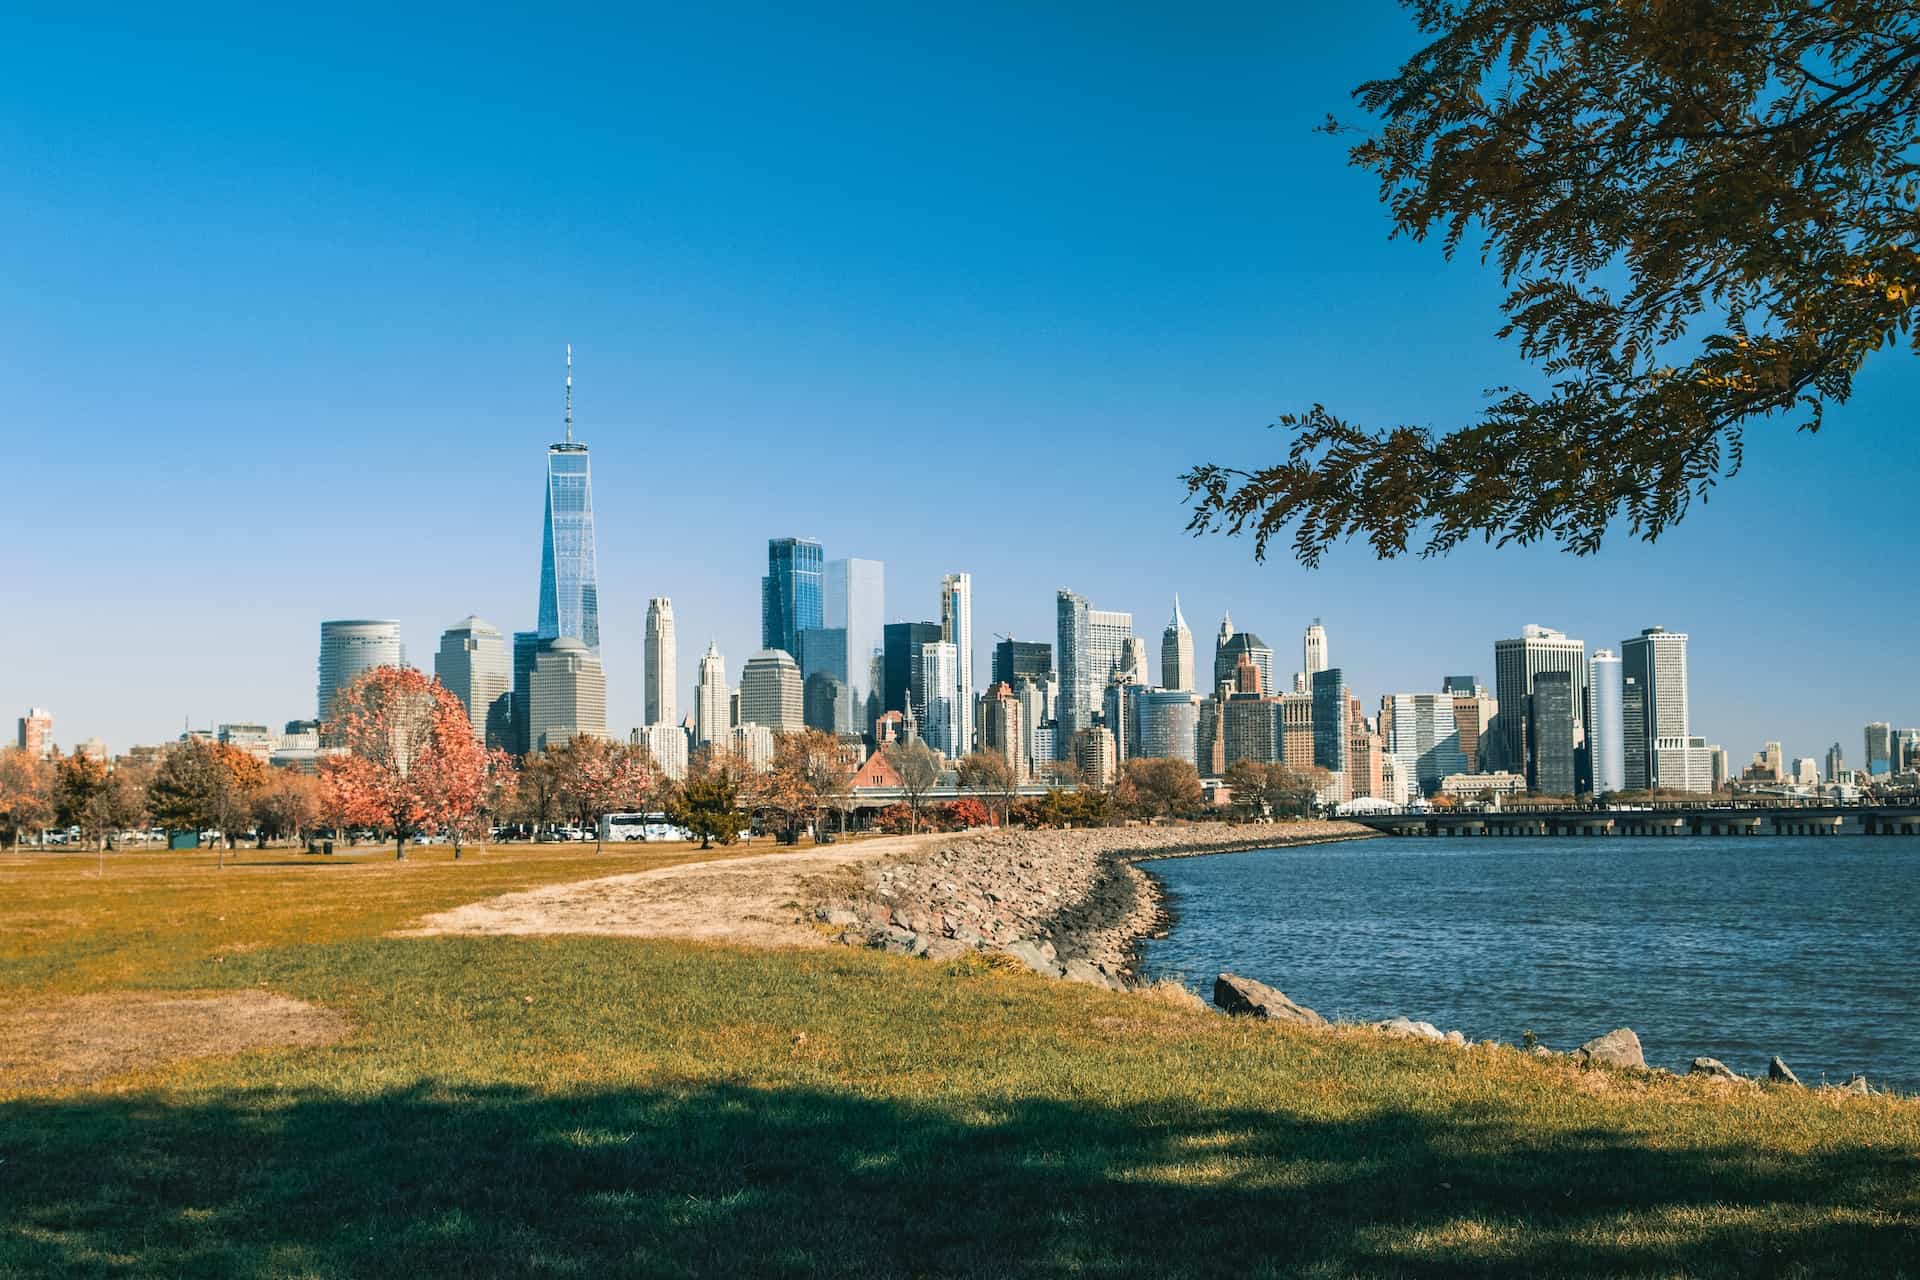 A view of the sprawling Manhattan skyline as seen from across the river in New Jersey.